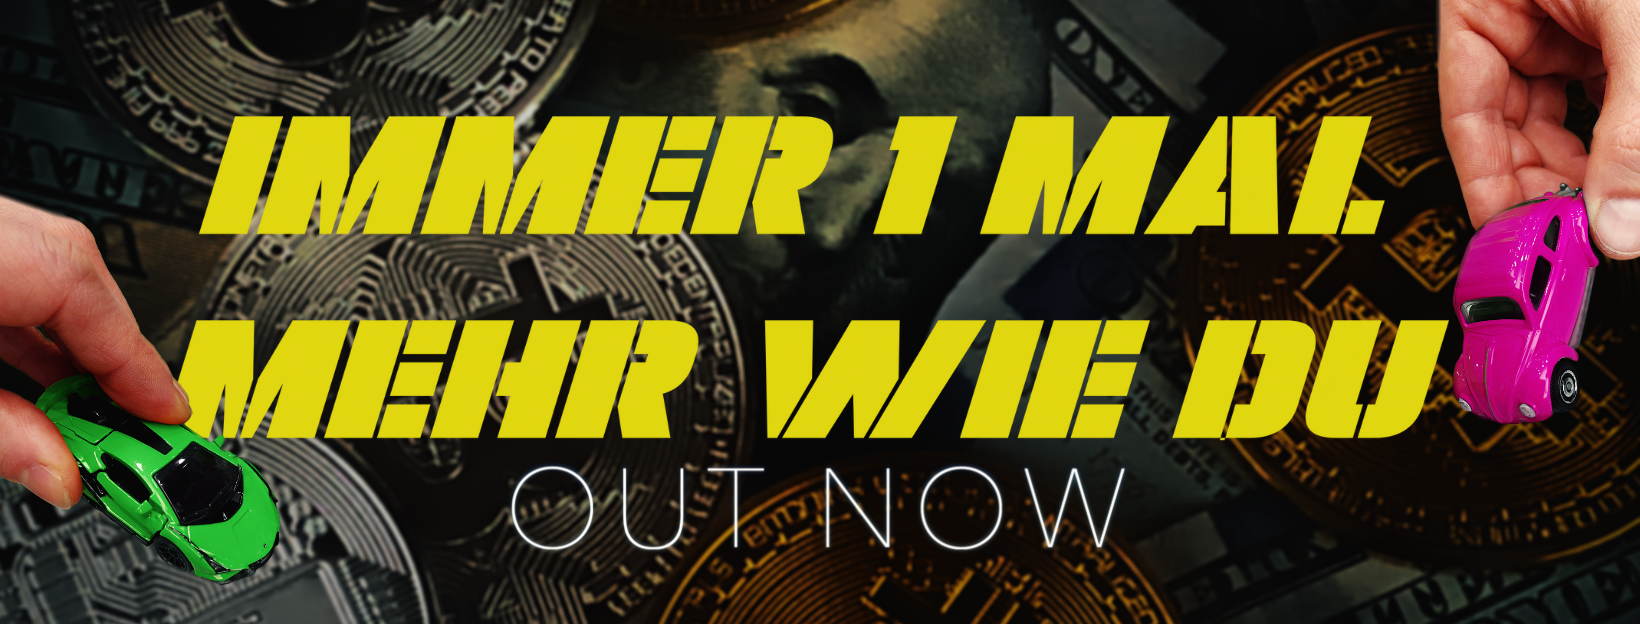 IEMMWD Banner OUT NOW